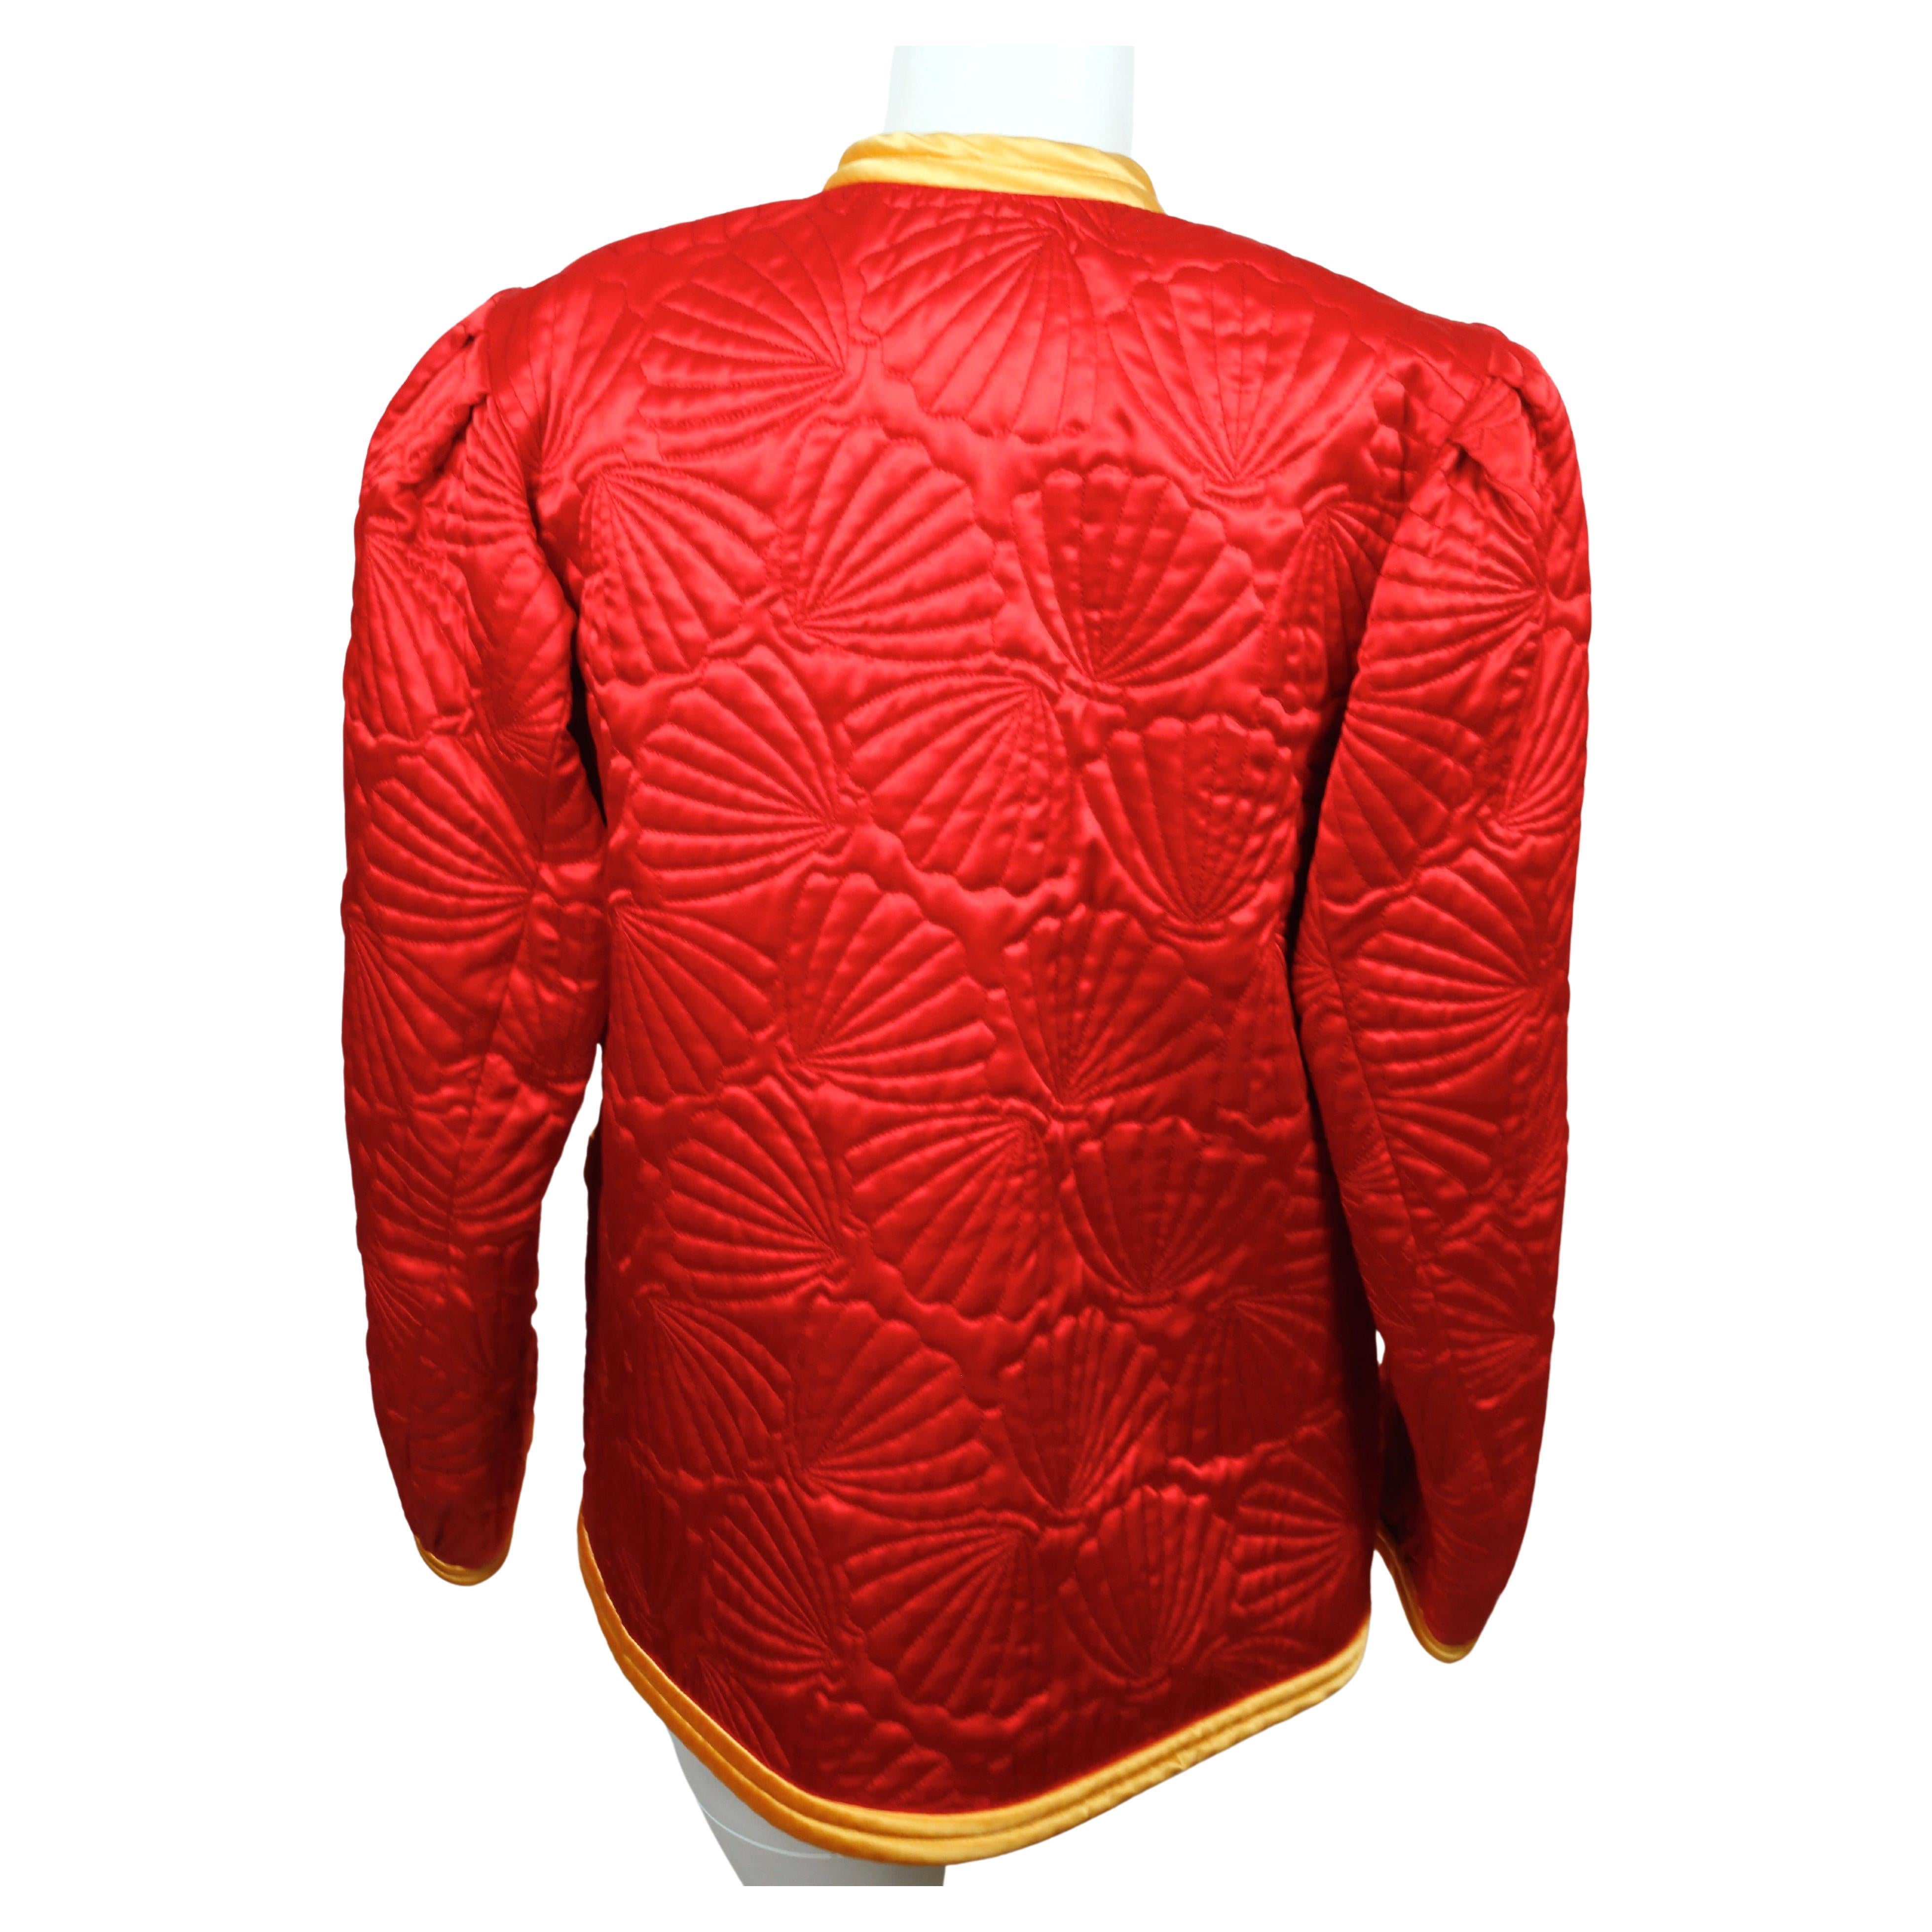 1979 SAINT LAURENT red satin RUNWAY jacket with seashell embroidery   In Good Condition For Sale In San Fransisco, CA